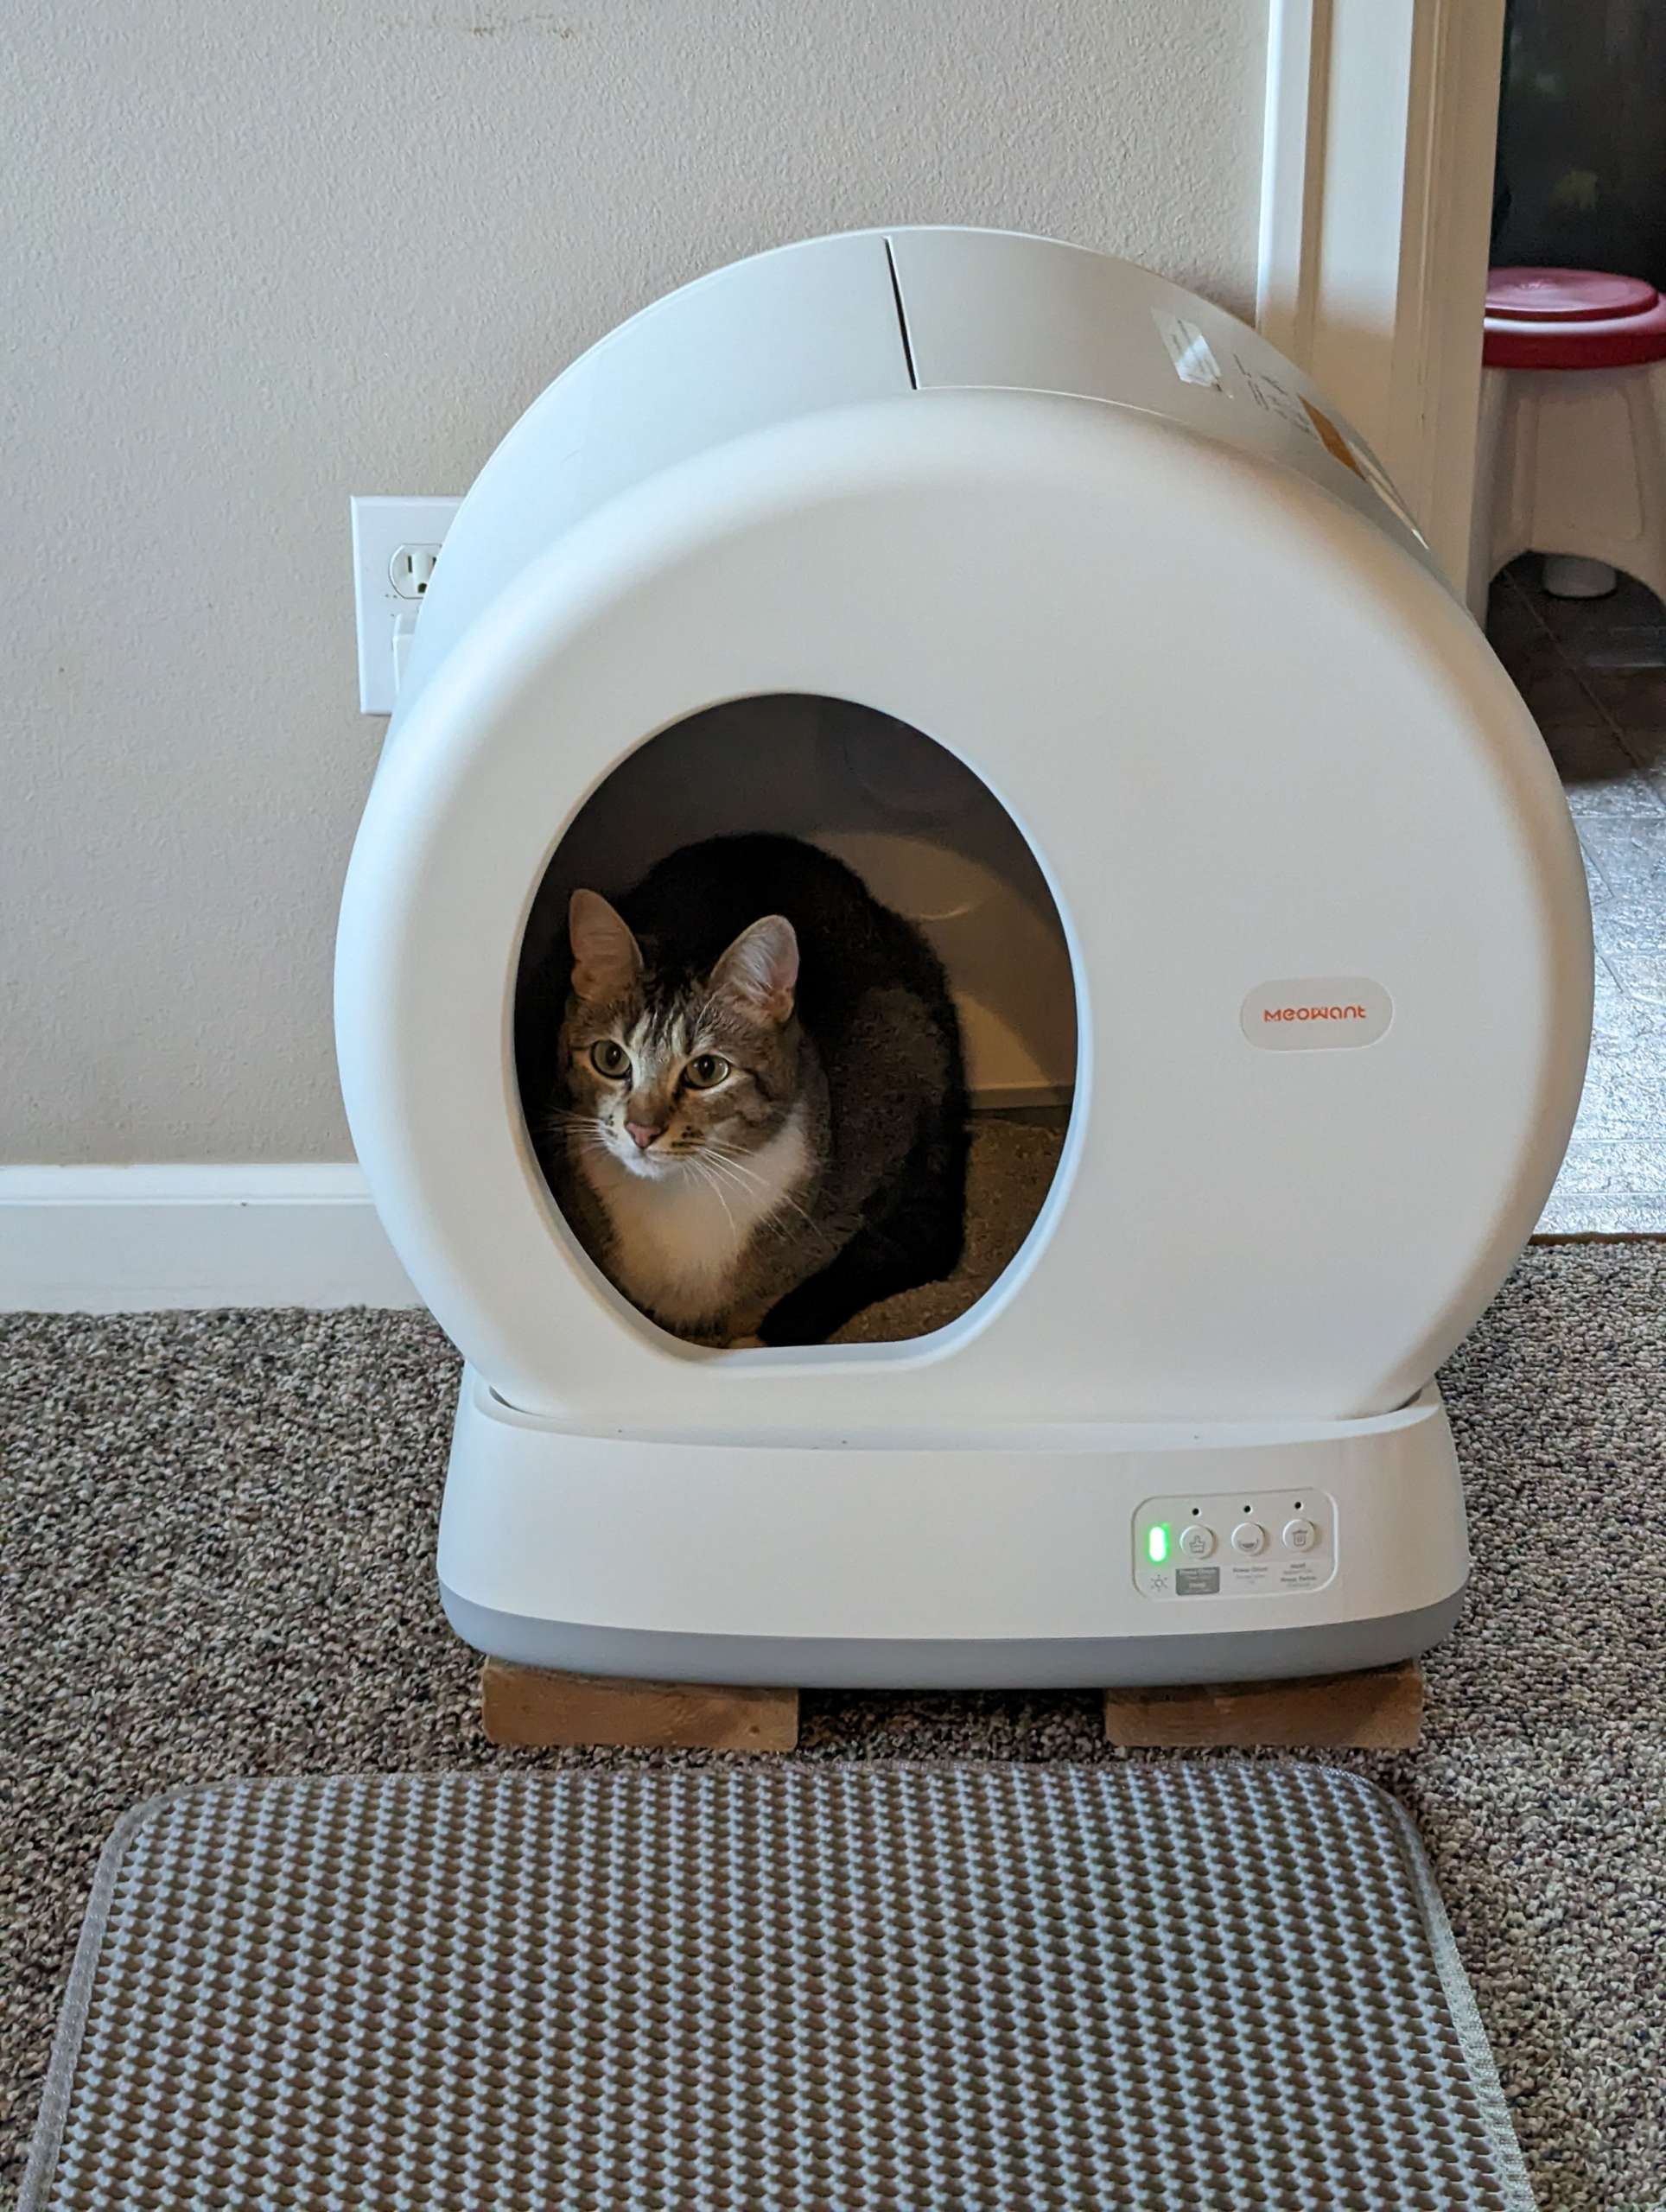 10 automatic litter boxes that you and your cat will love - Reviewed